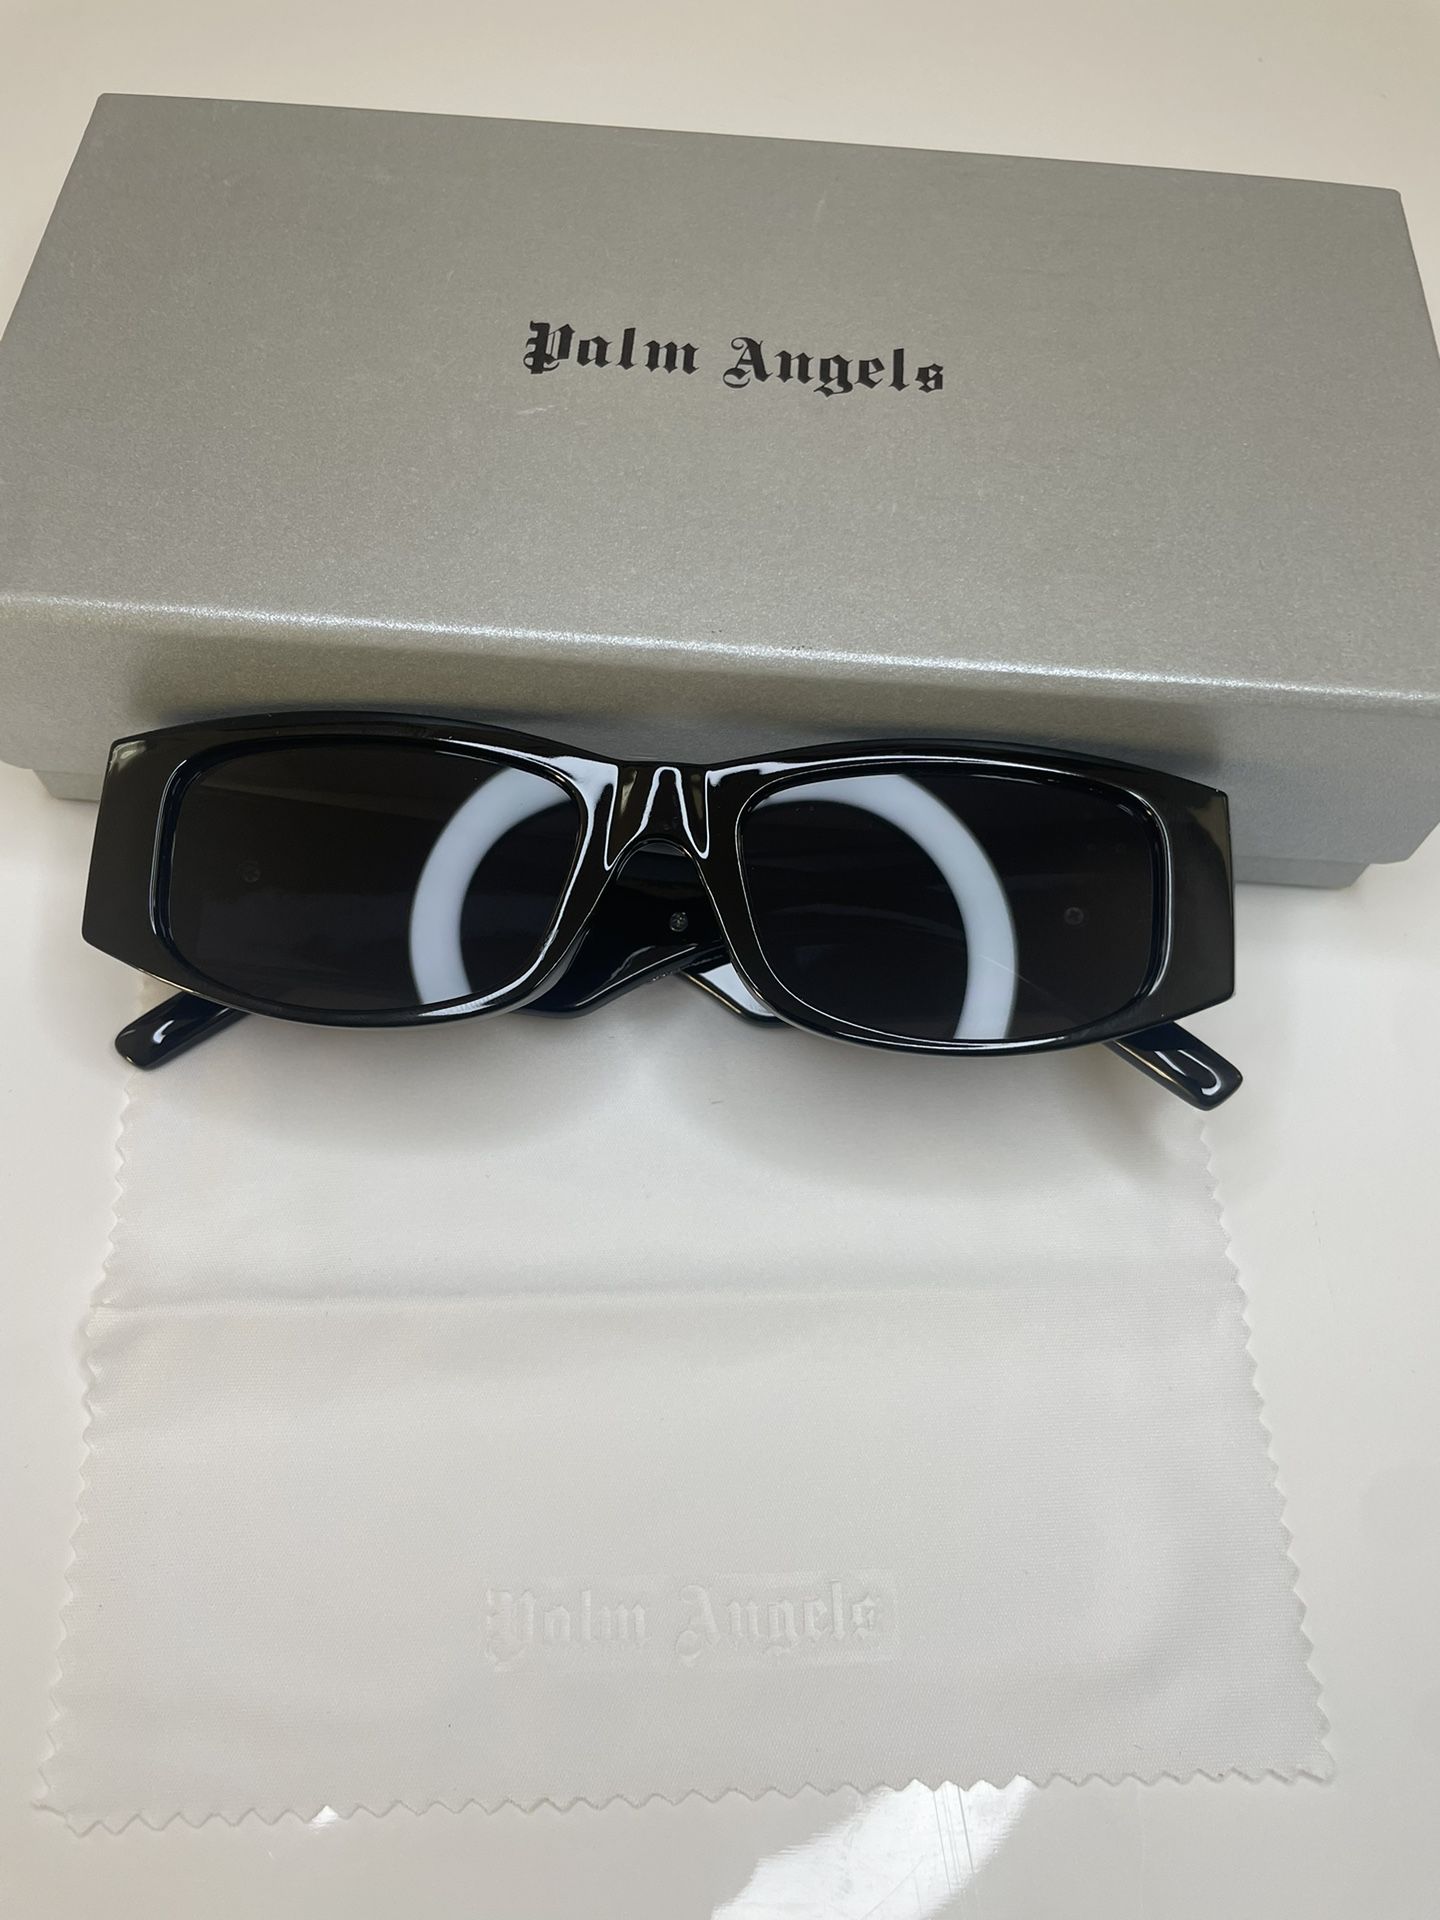 *BEST OFFER* Silver Palm Angel Sunglasses 